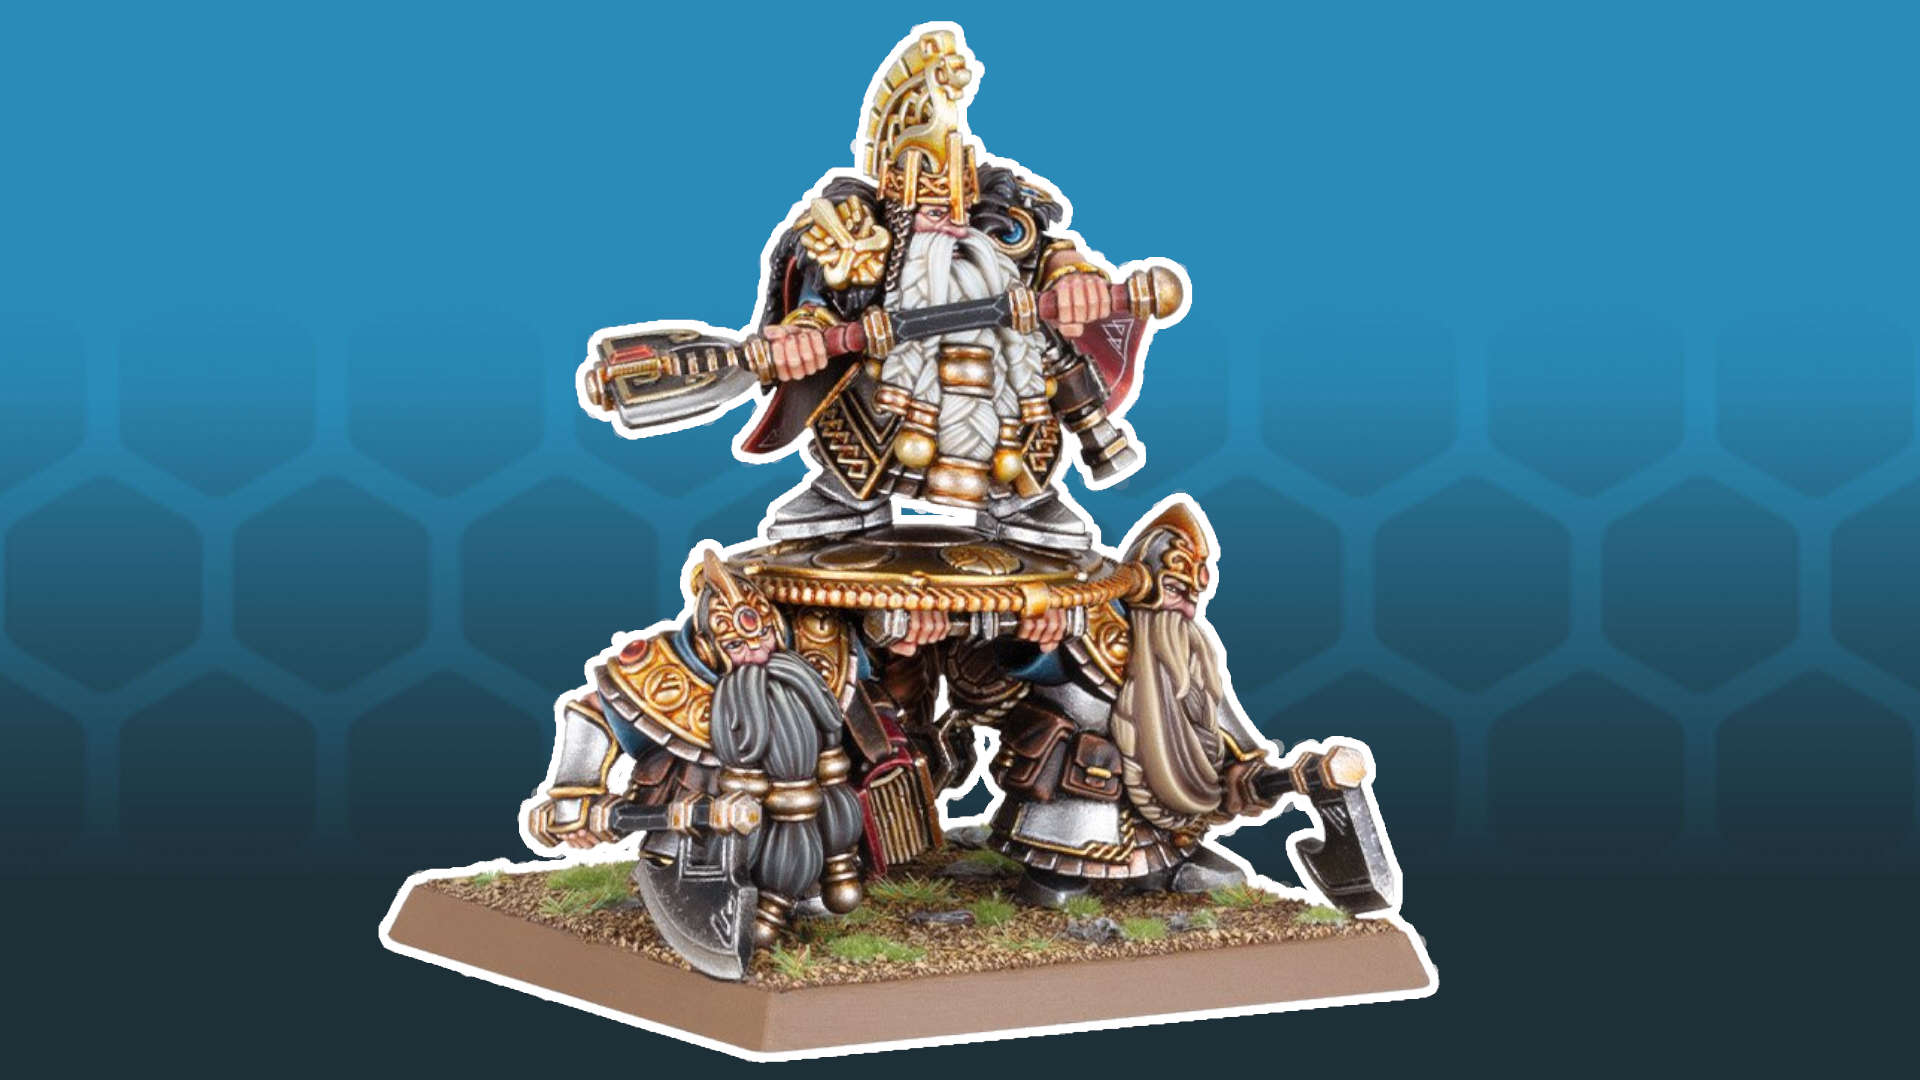 A new King leads the Dwarfs into Warhammer The Old World